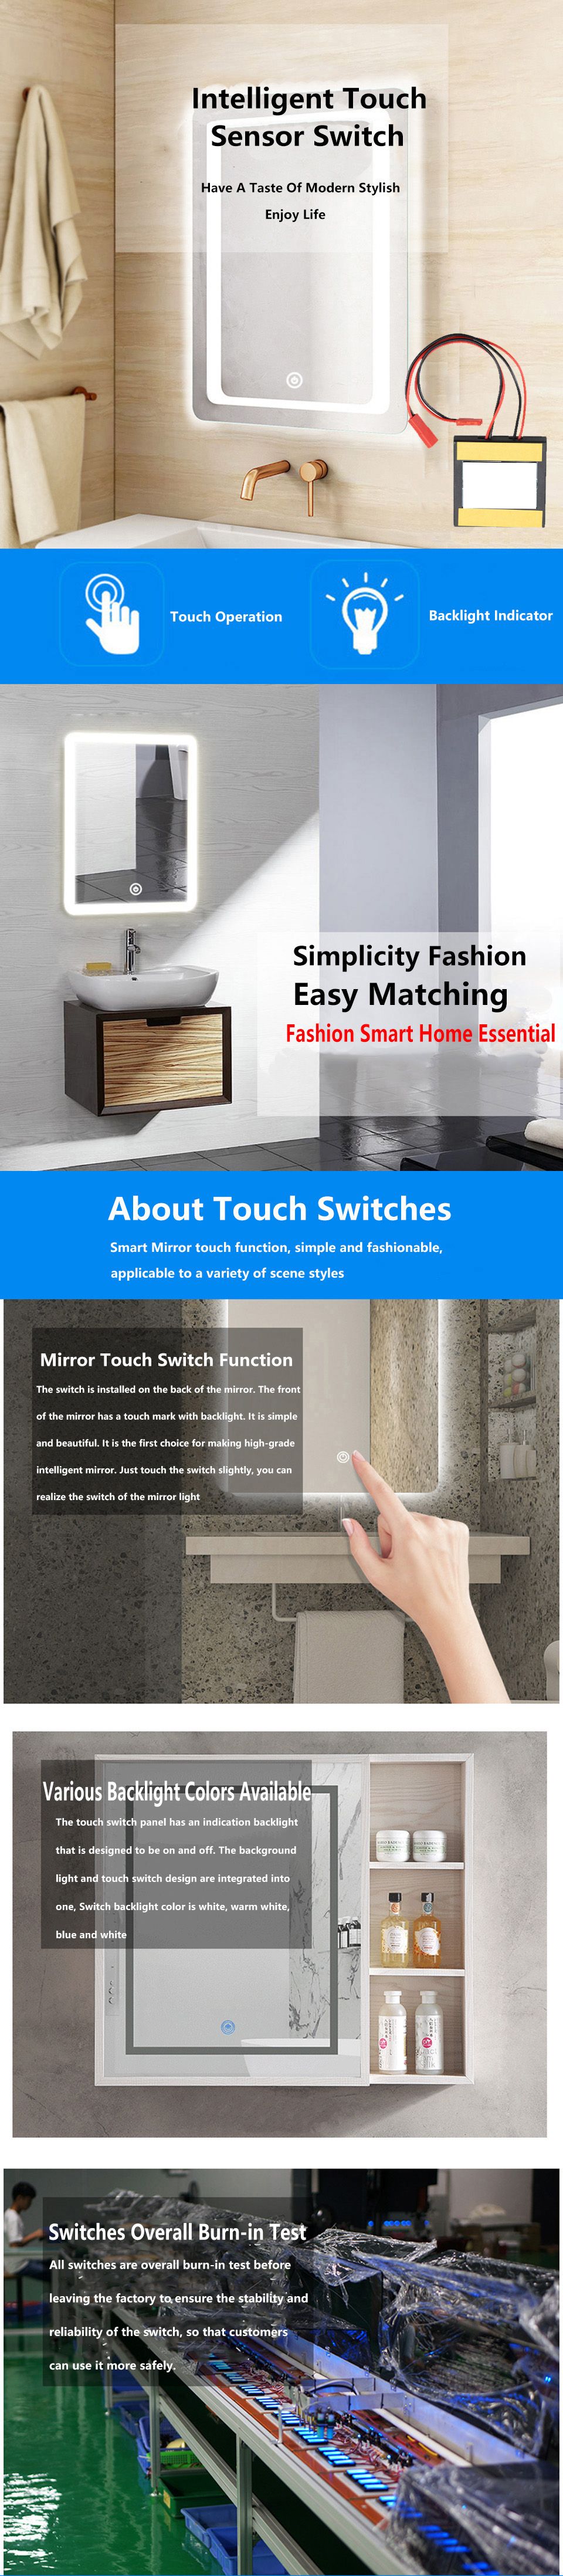 Bathroom-Mirror-Switch-3-Mode-12V-Touch-Switch-Sensor-For-Led-Light-Switch-Mirror-Headligh-Interior--1686296